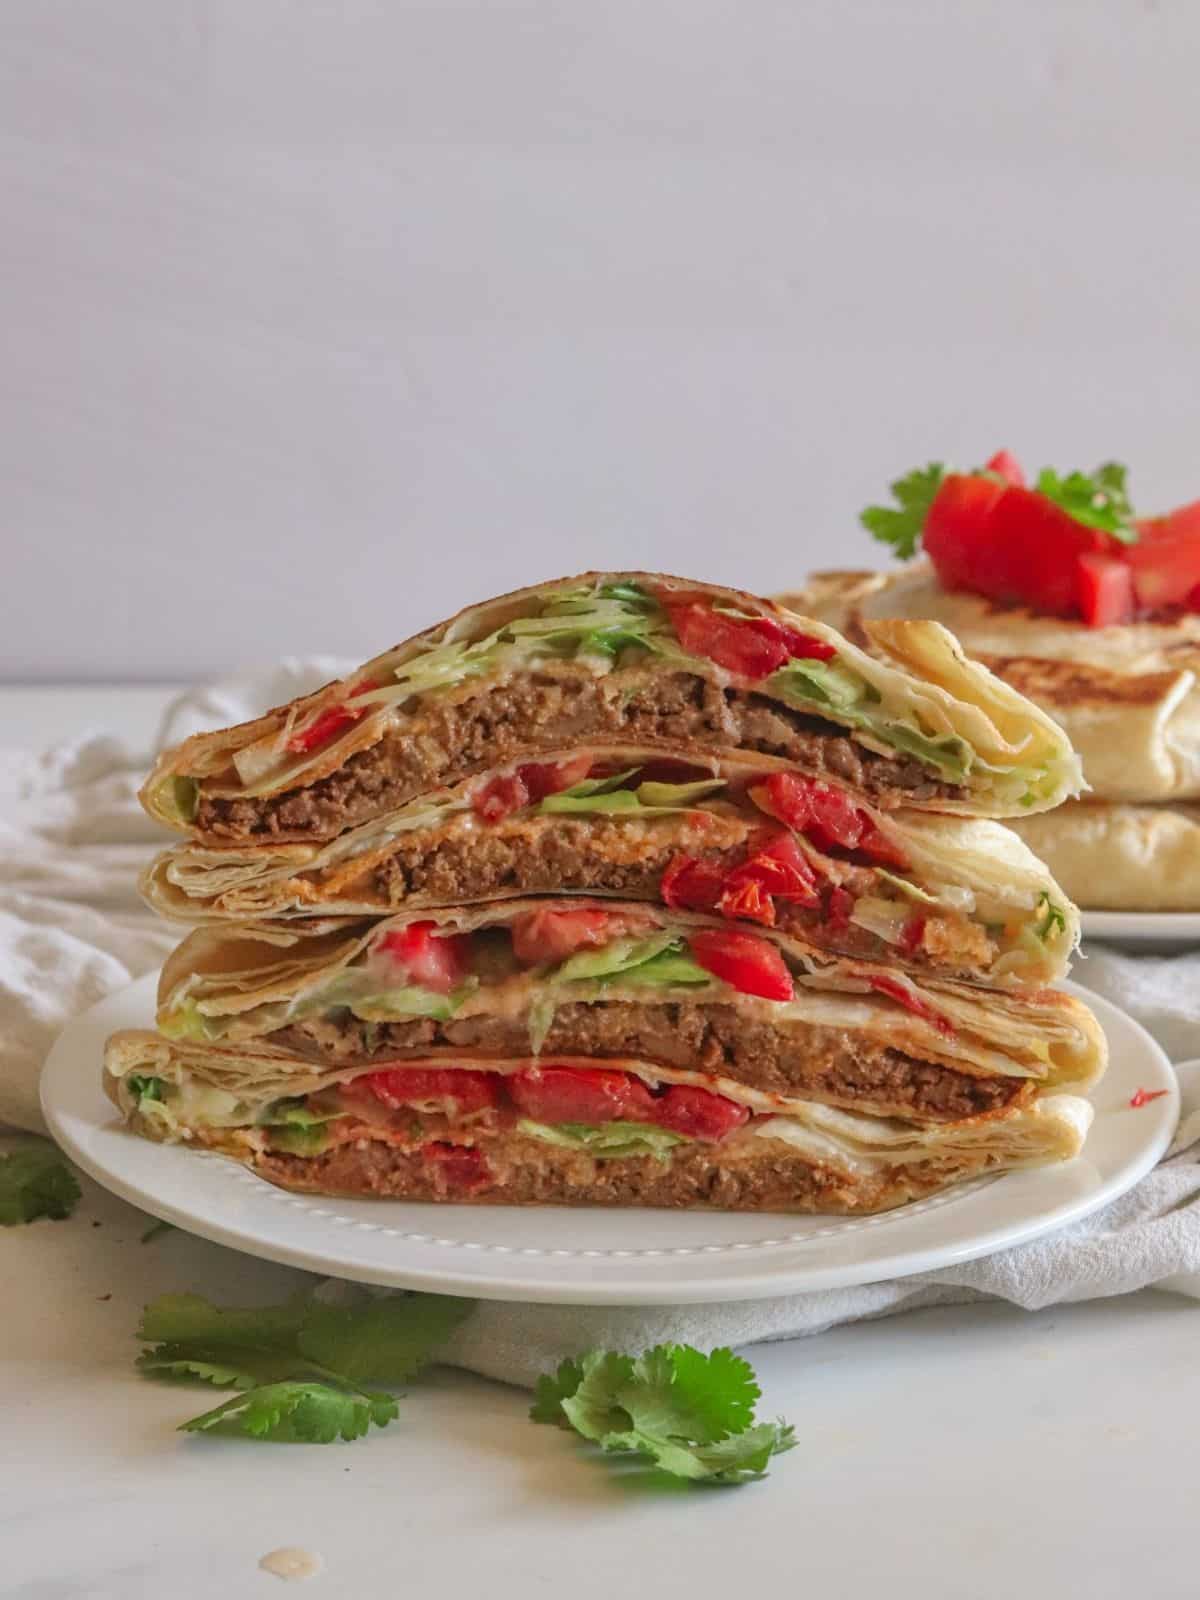 Stacked tortillas that are filled on white plate